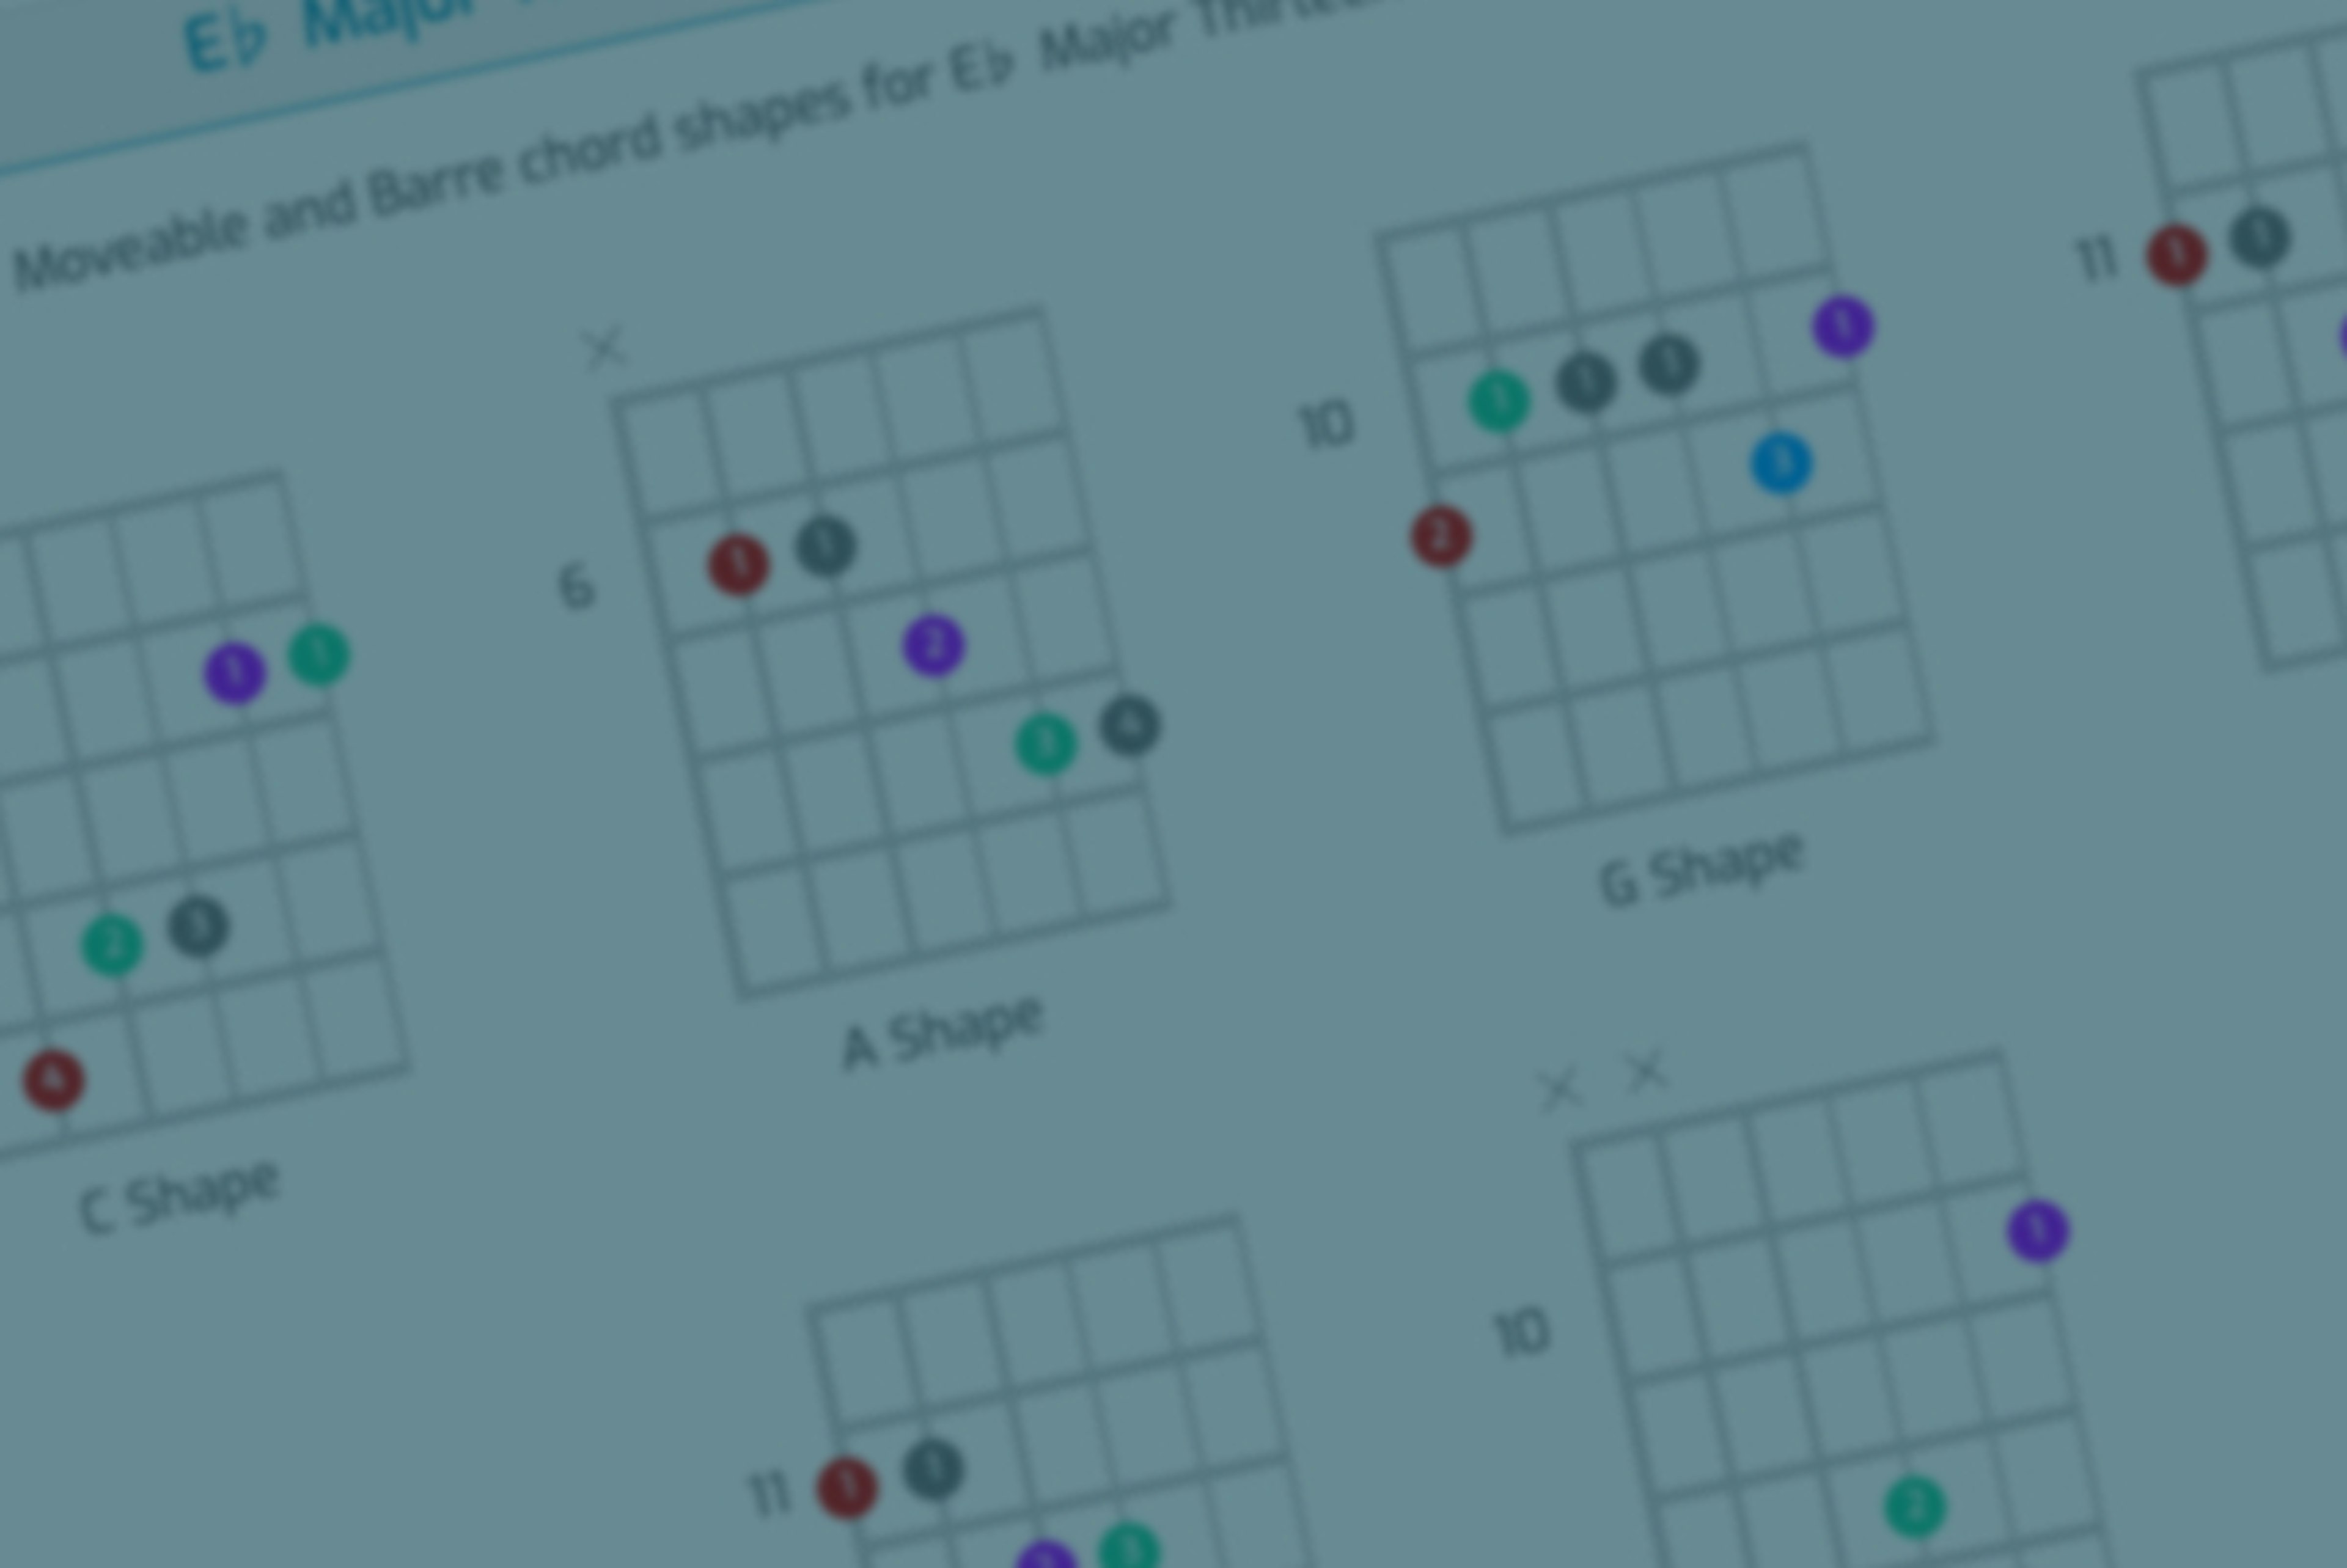 Learn Chords on Guitar